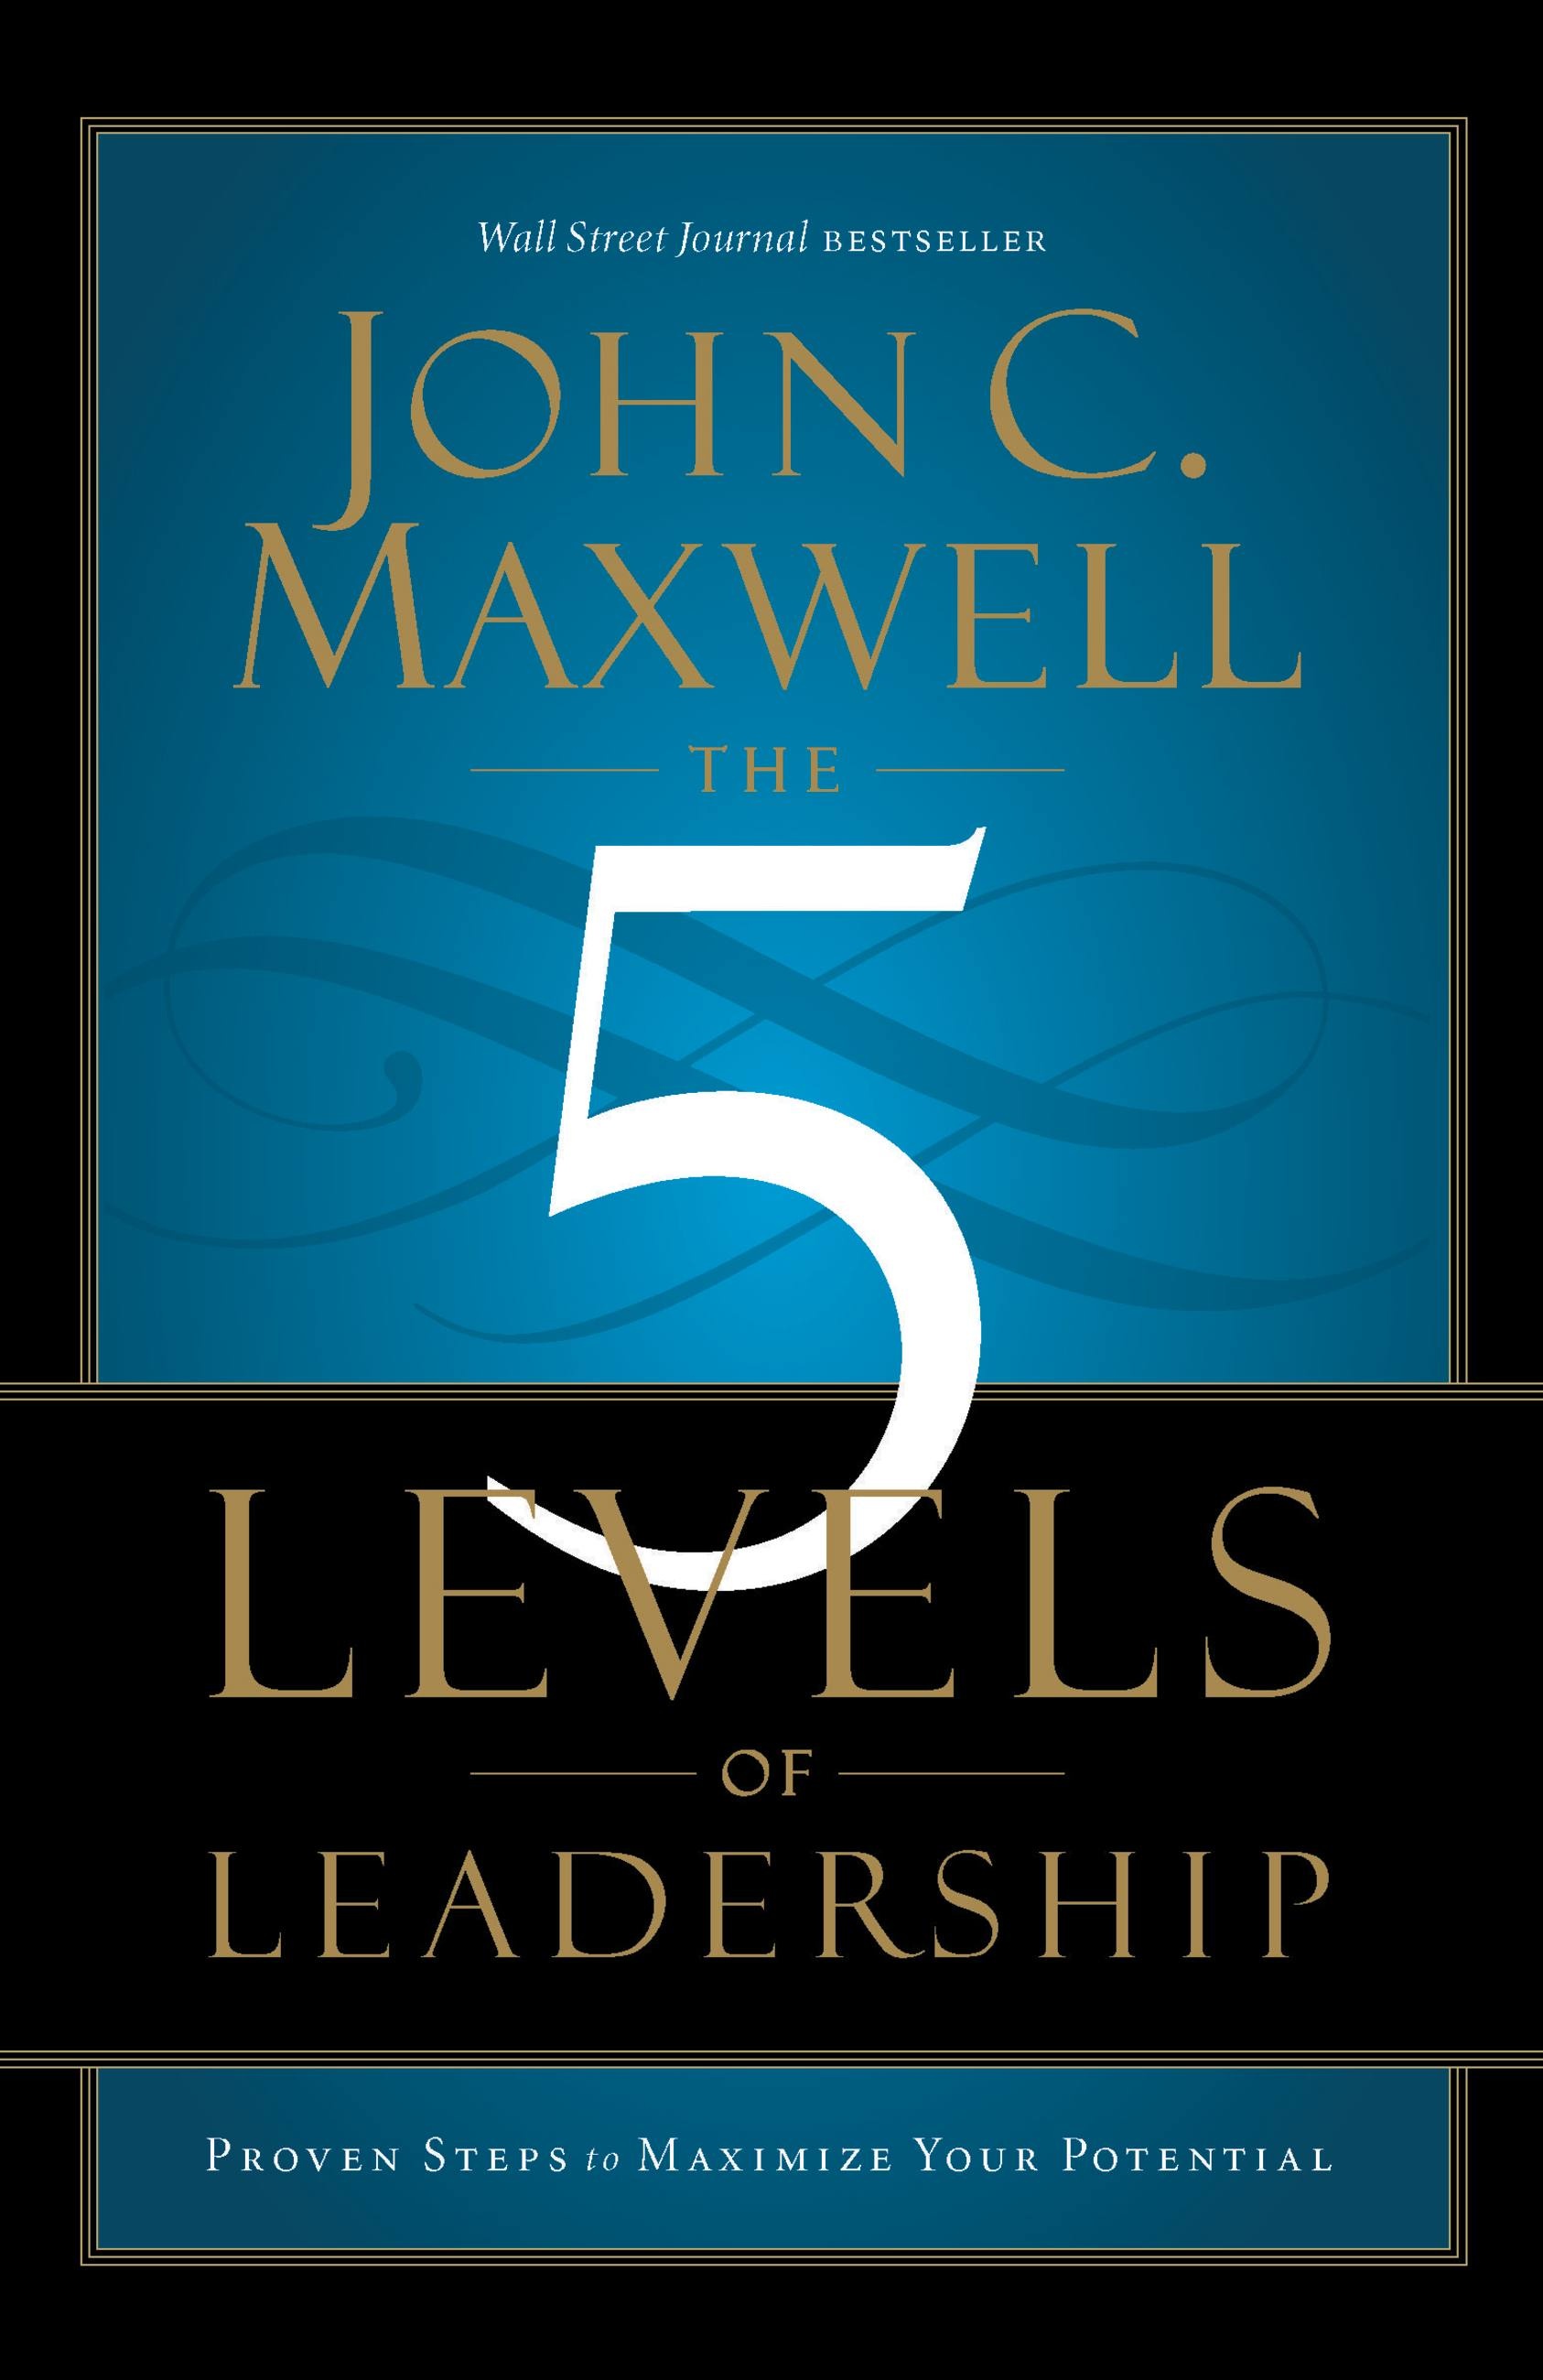 The 5 Levels of Leadership by John C. Maxwell | Hachette Book Group